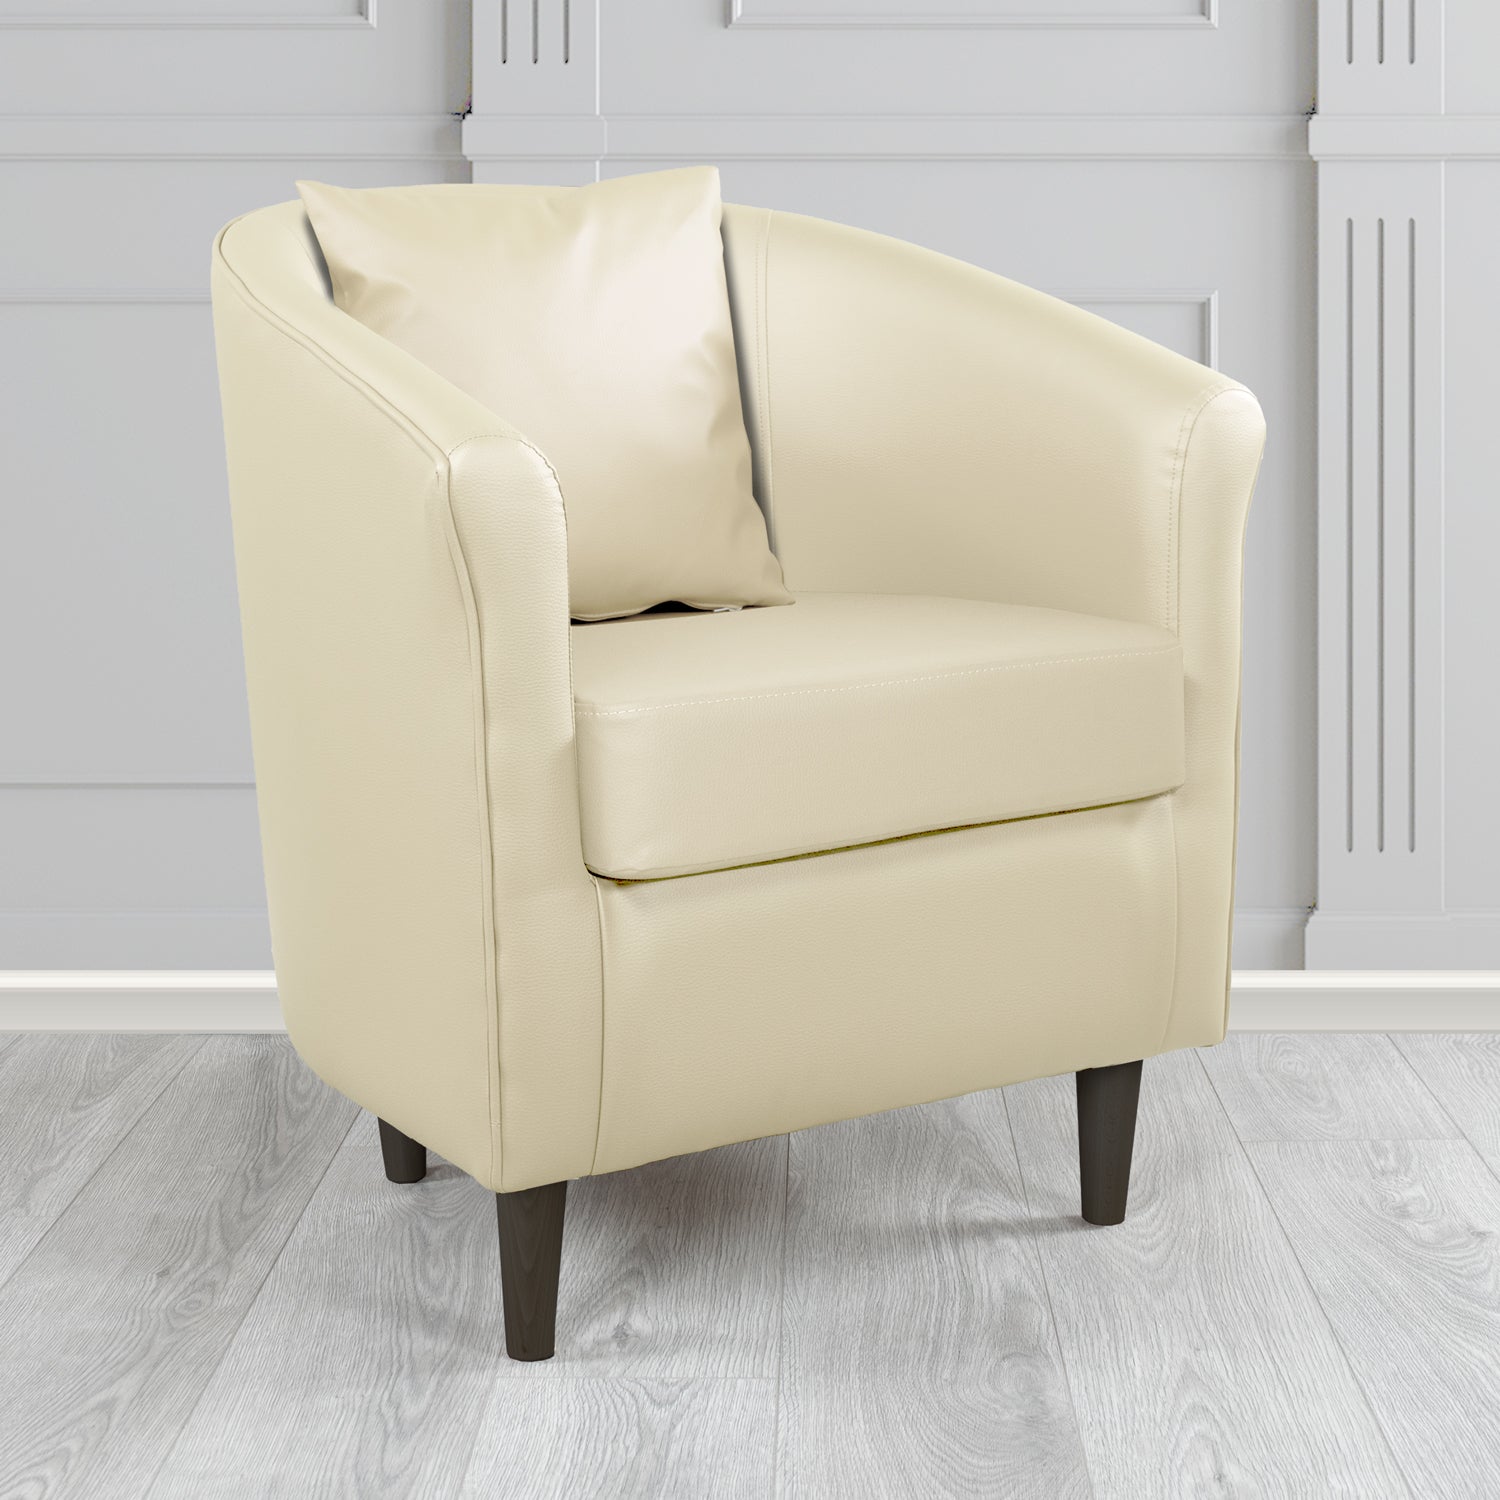 St Tropez Tub Chair with Scatter Cushion in Madrid Cream Faux Leather